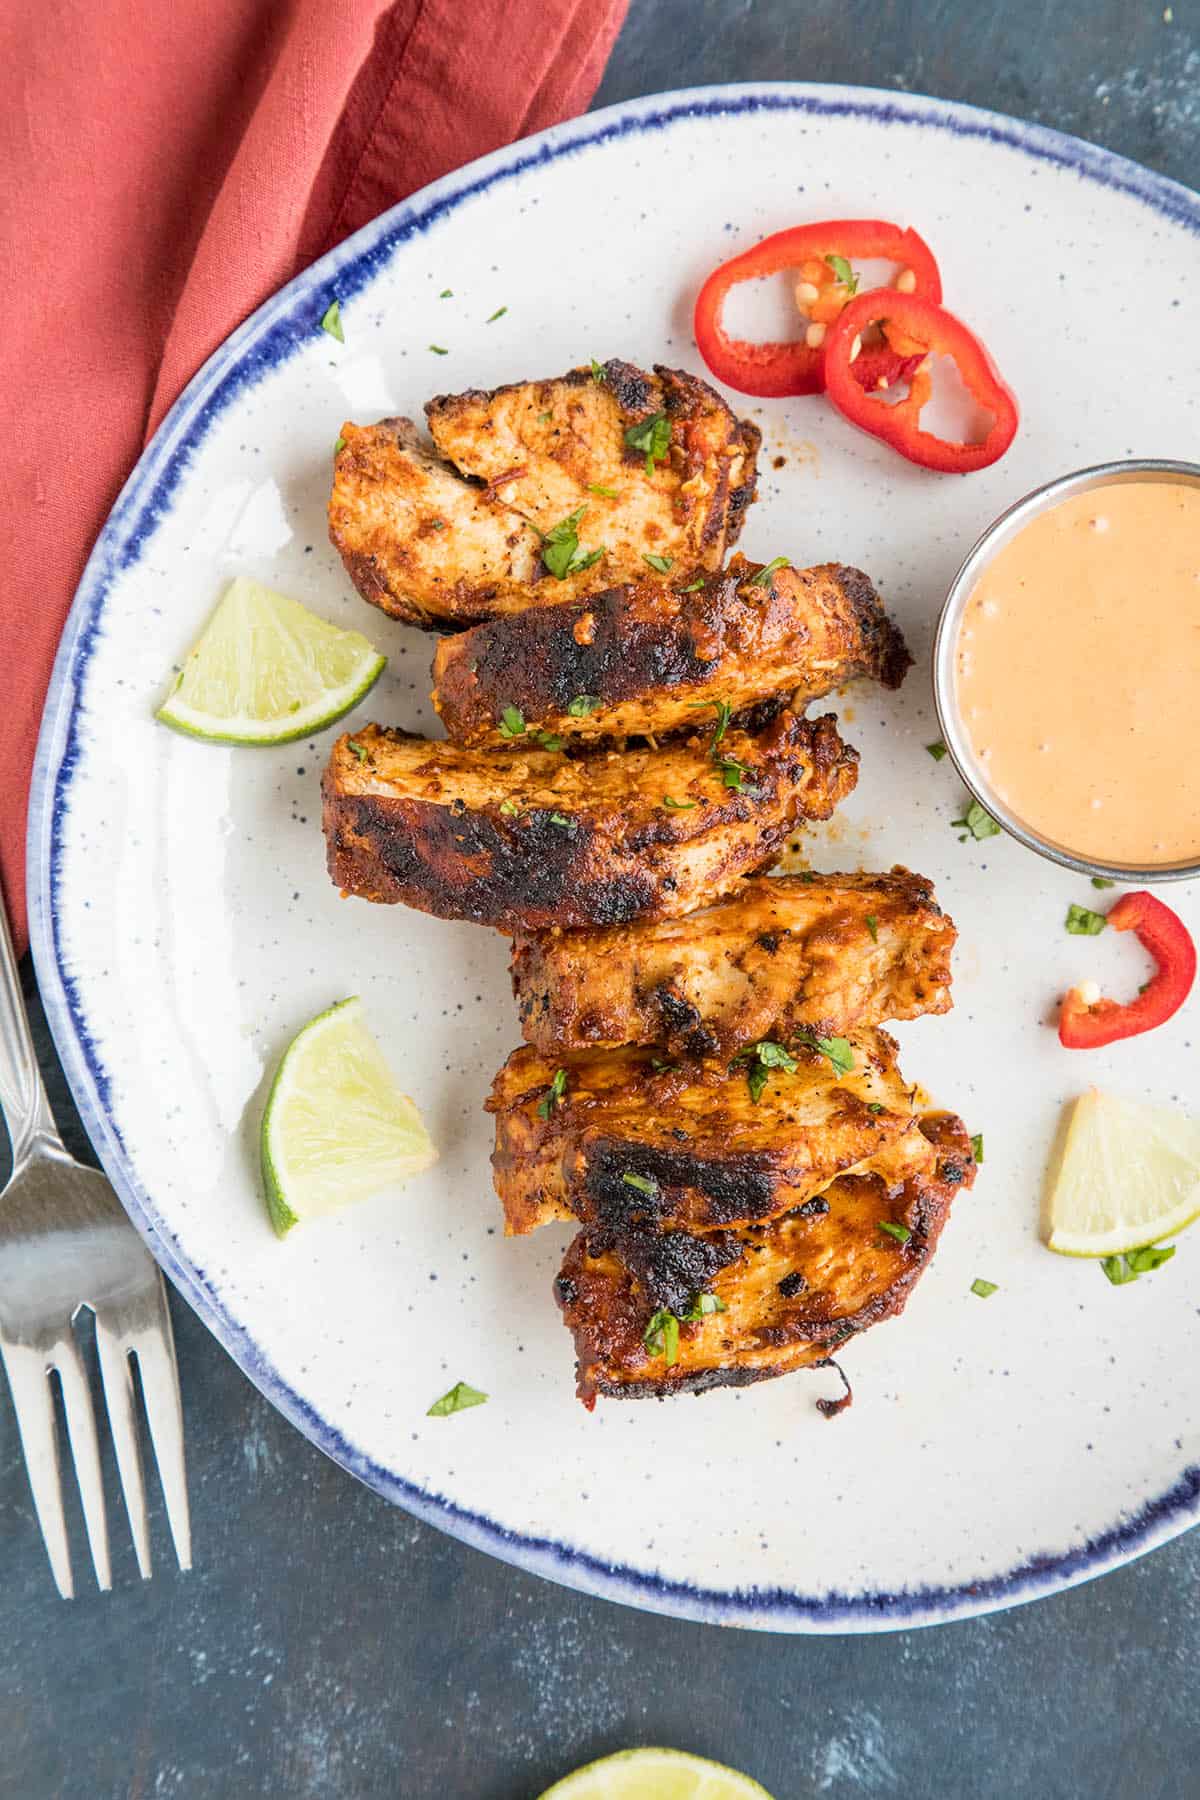 Chipotle Chicken Recipe - Cooks up in practically no time. A quick and easy meal.